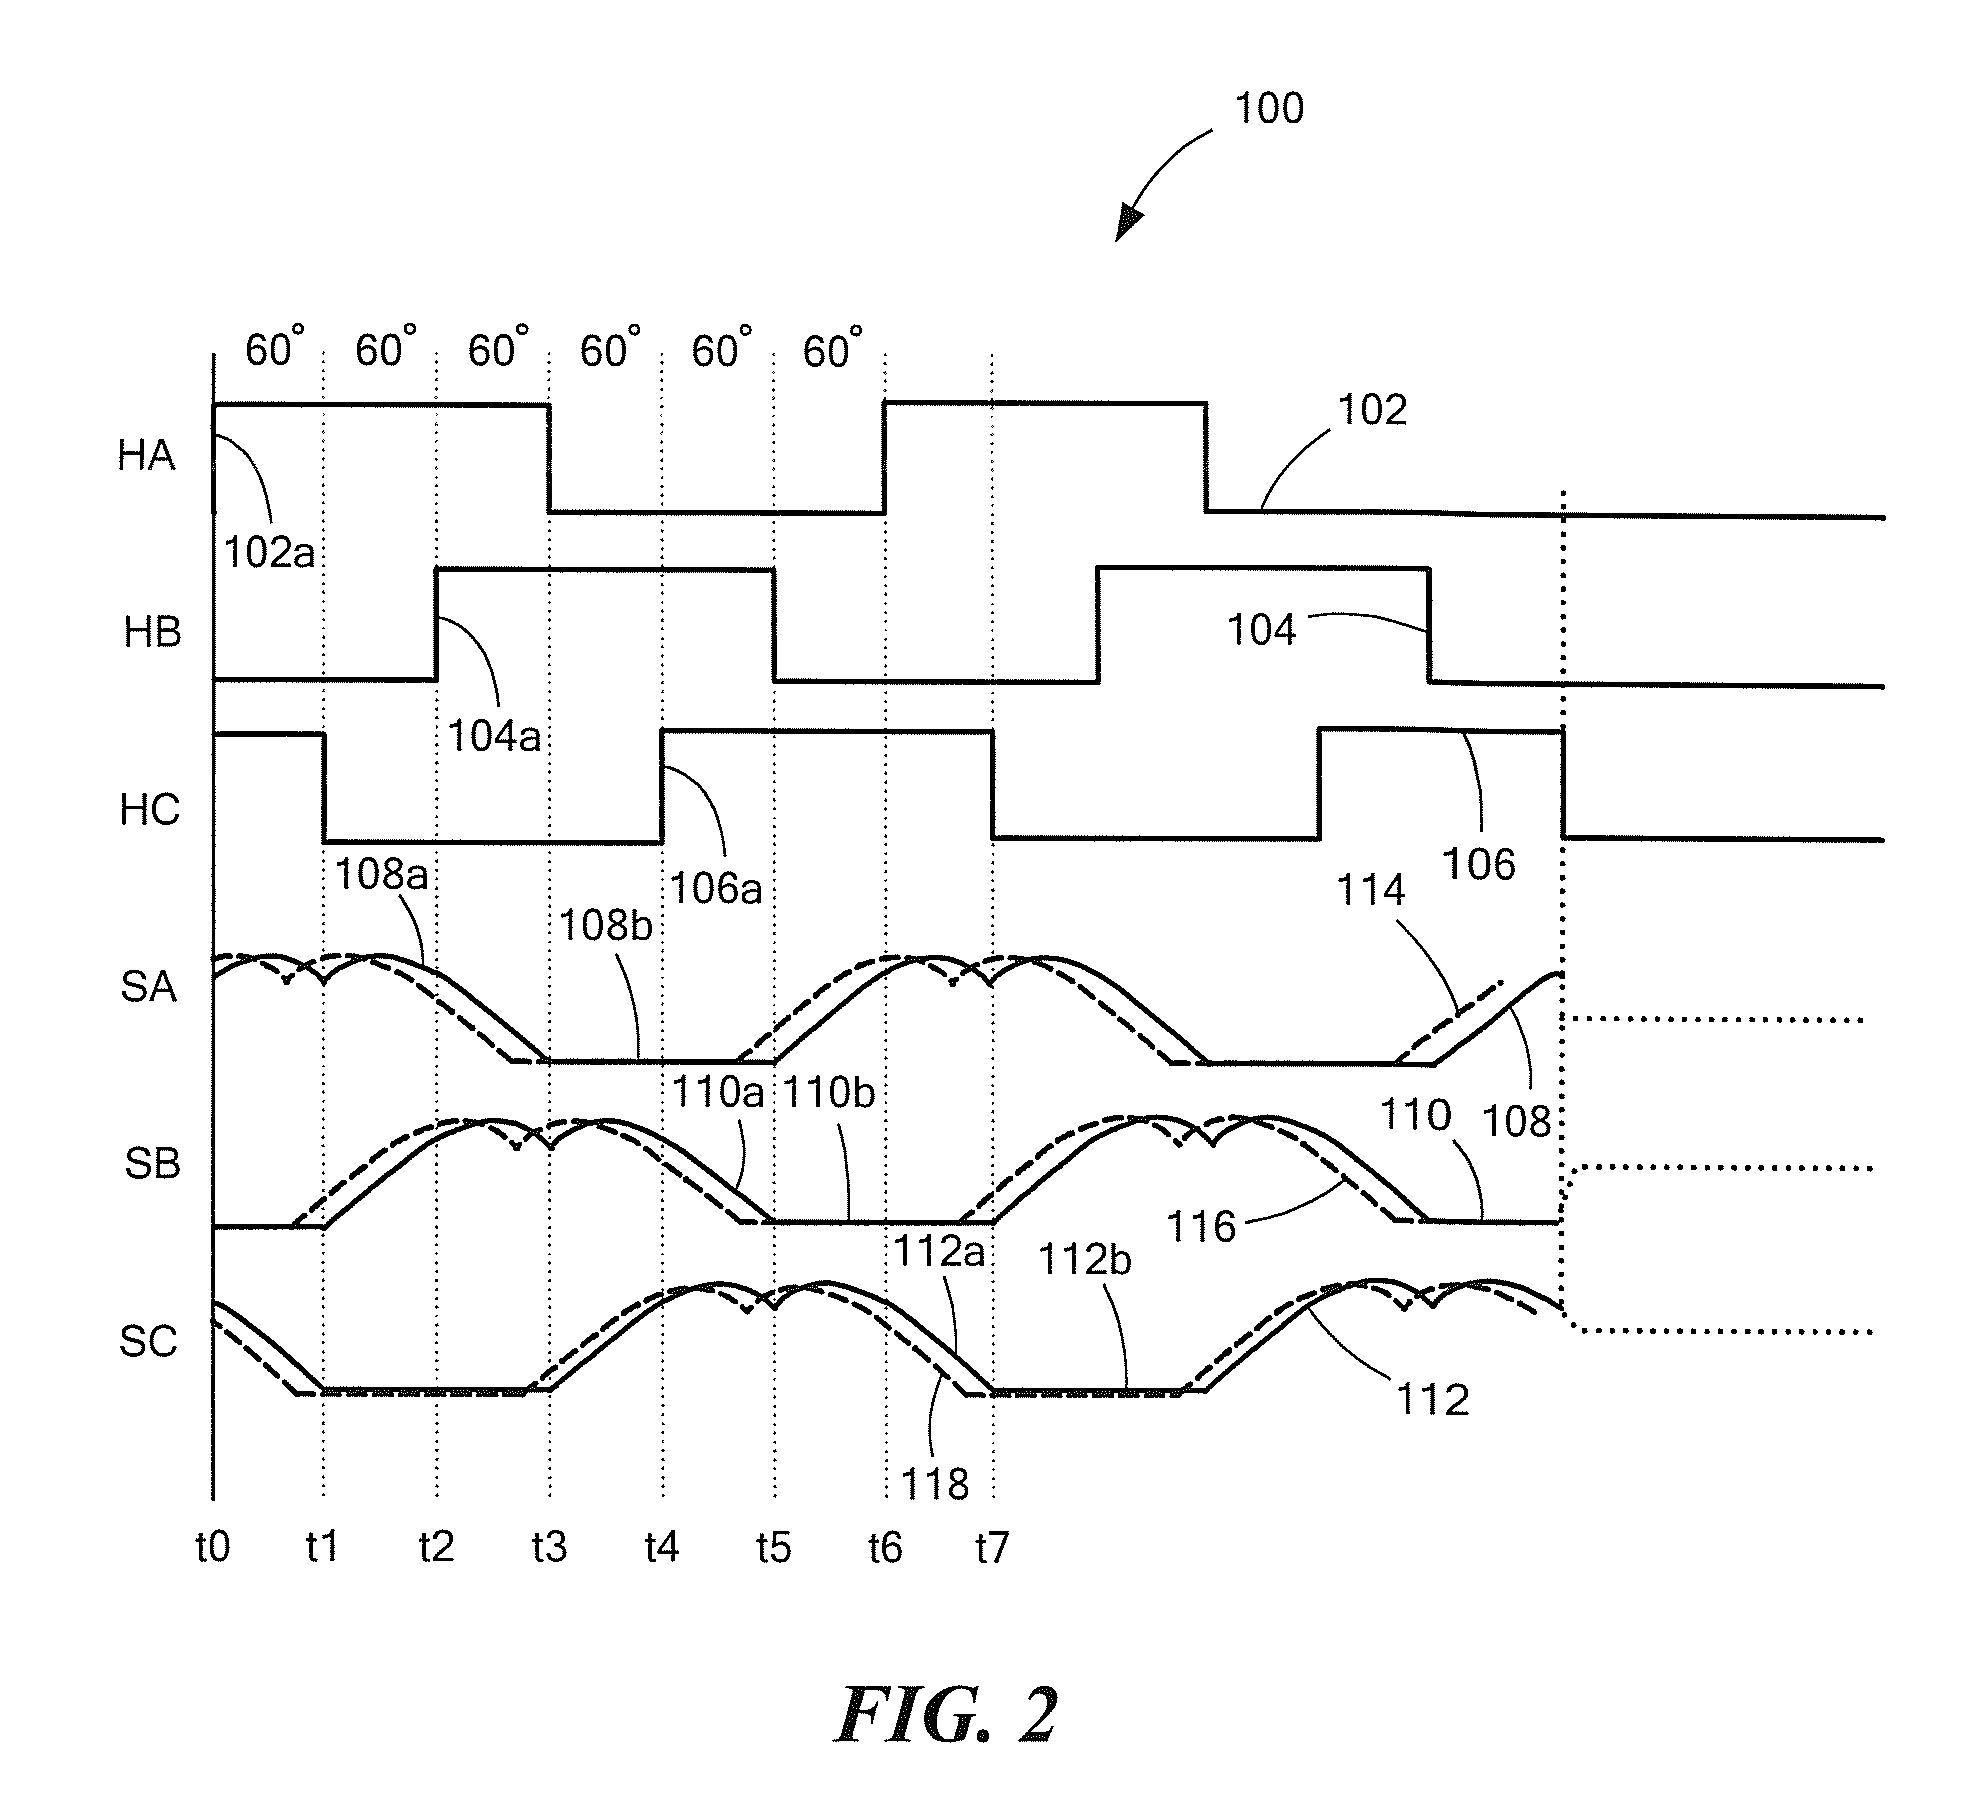 Electronic circuit and method generating electric motor drive signals having phase advances in accordance with a user selected relationship between rotational speed of an electric motor and the phase advances